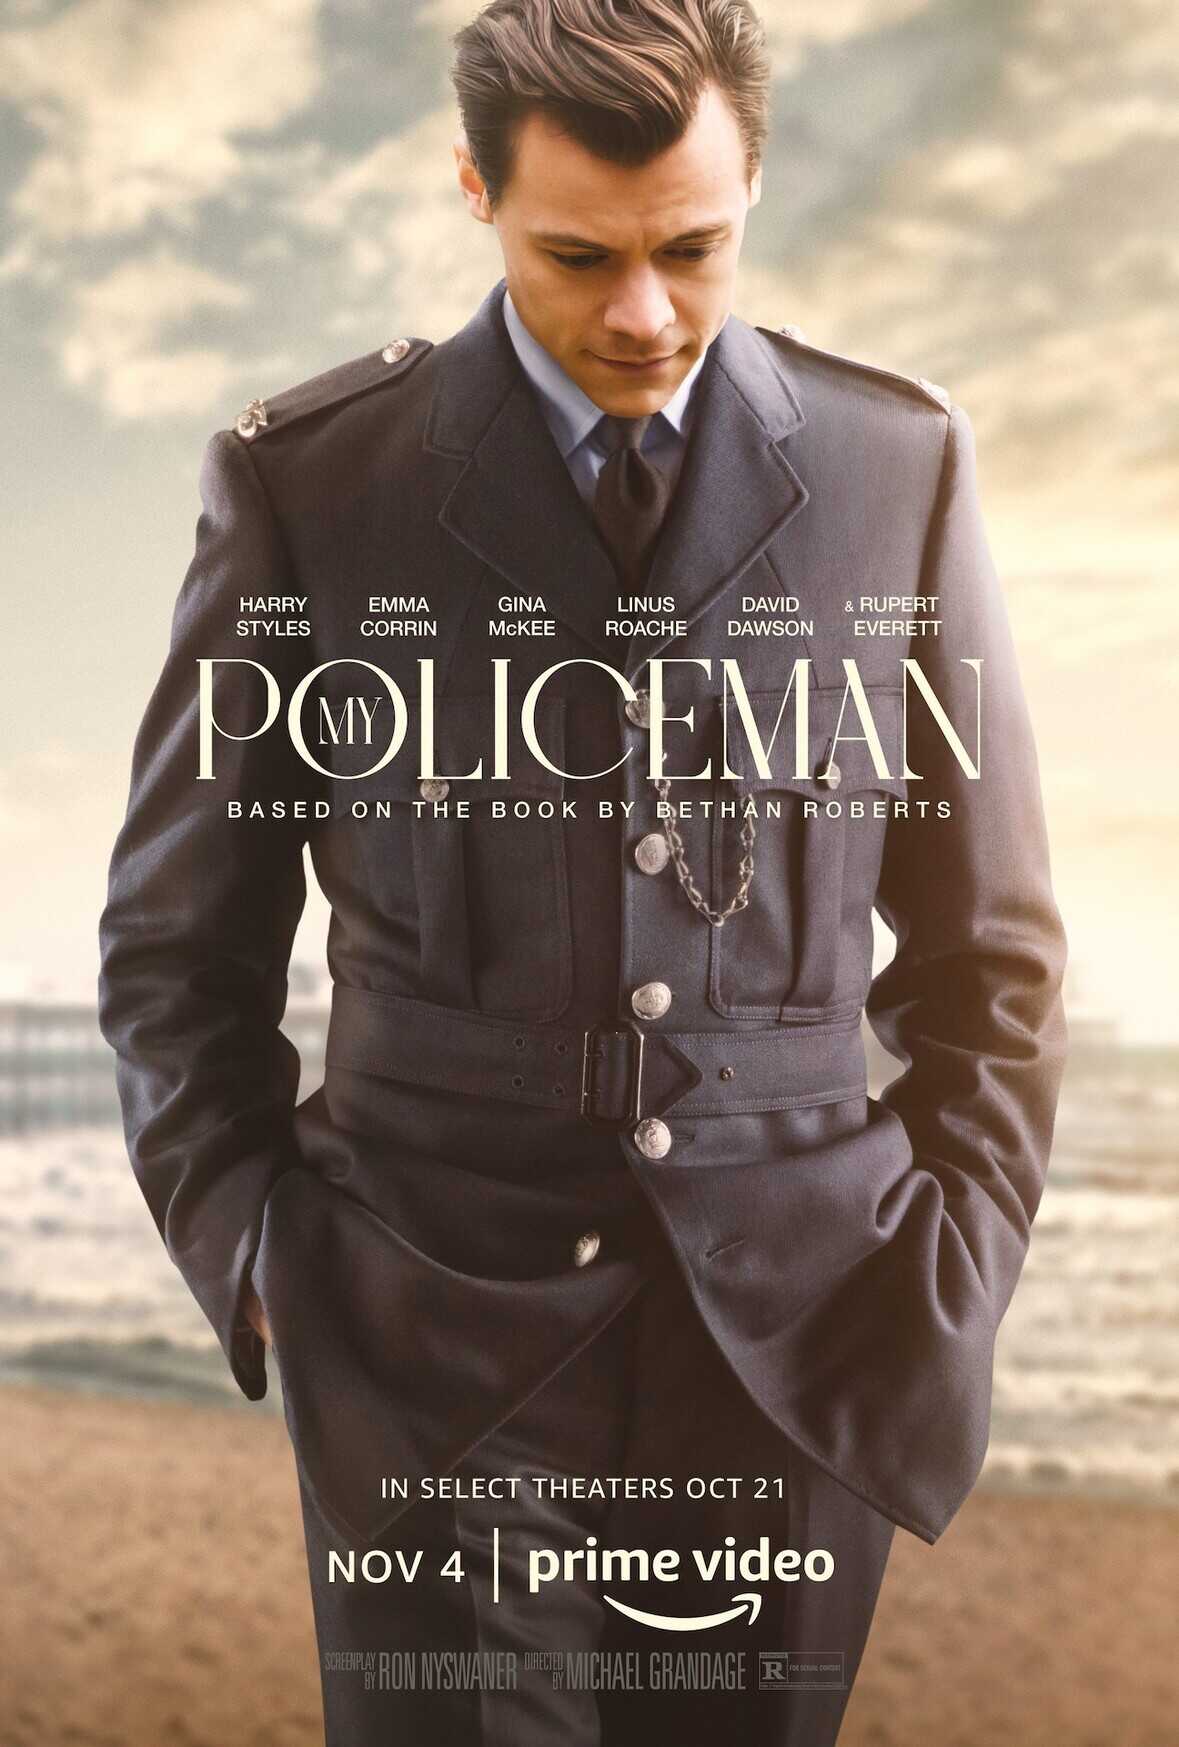 Theatrical poster for My Policeman.